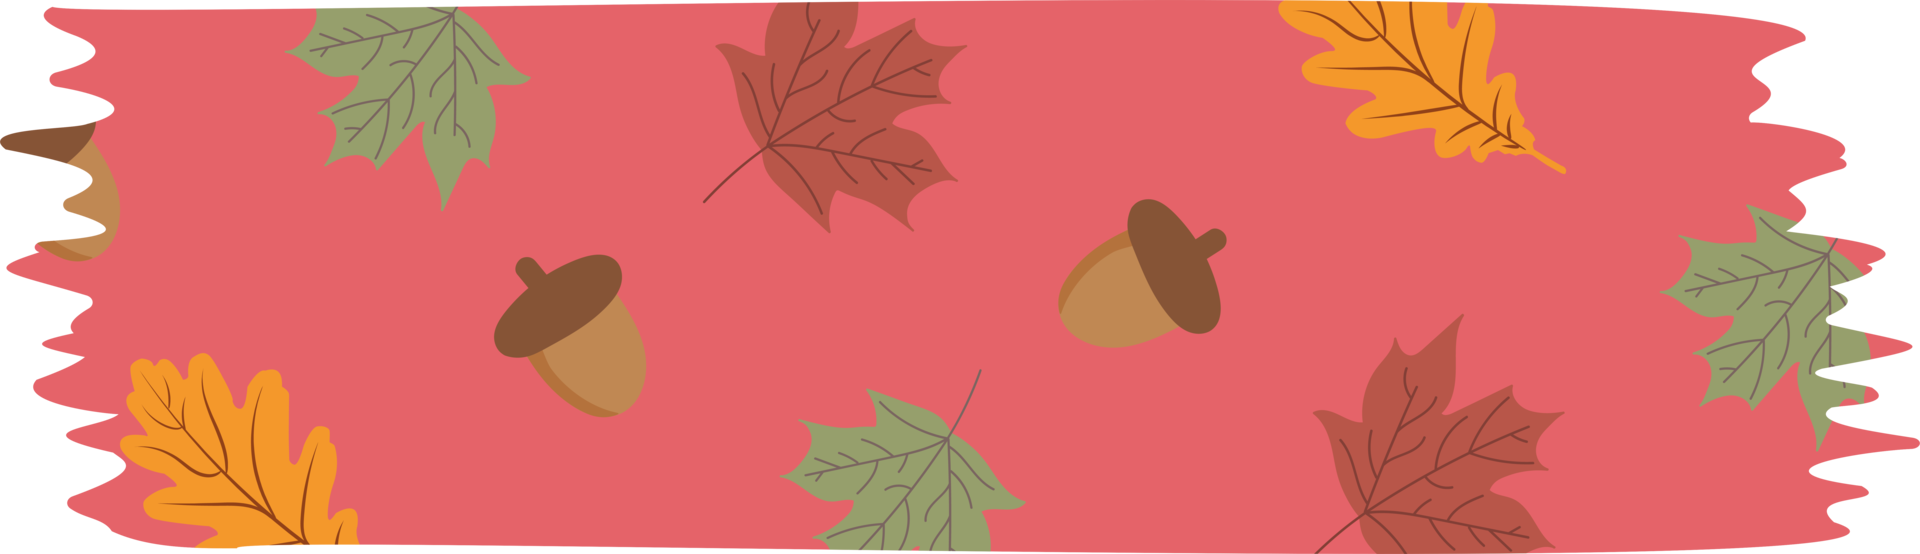 washi tape autumn concept drawing png